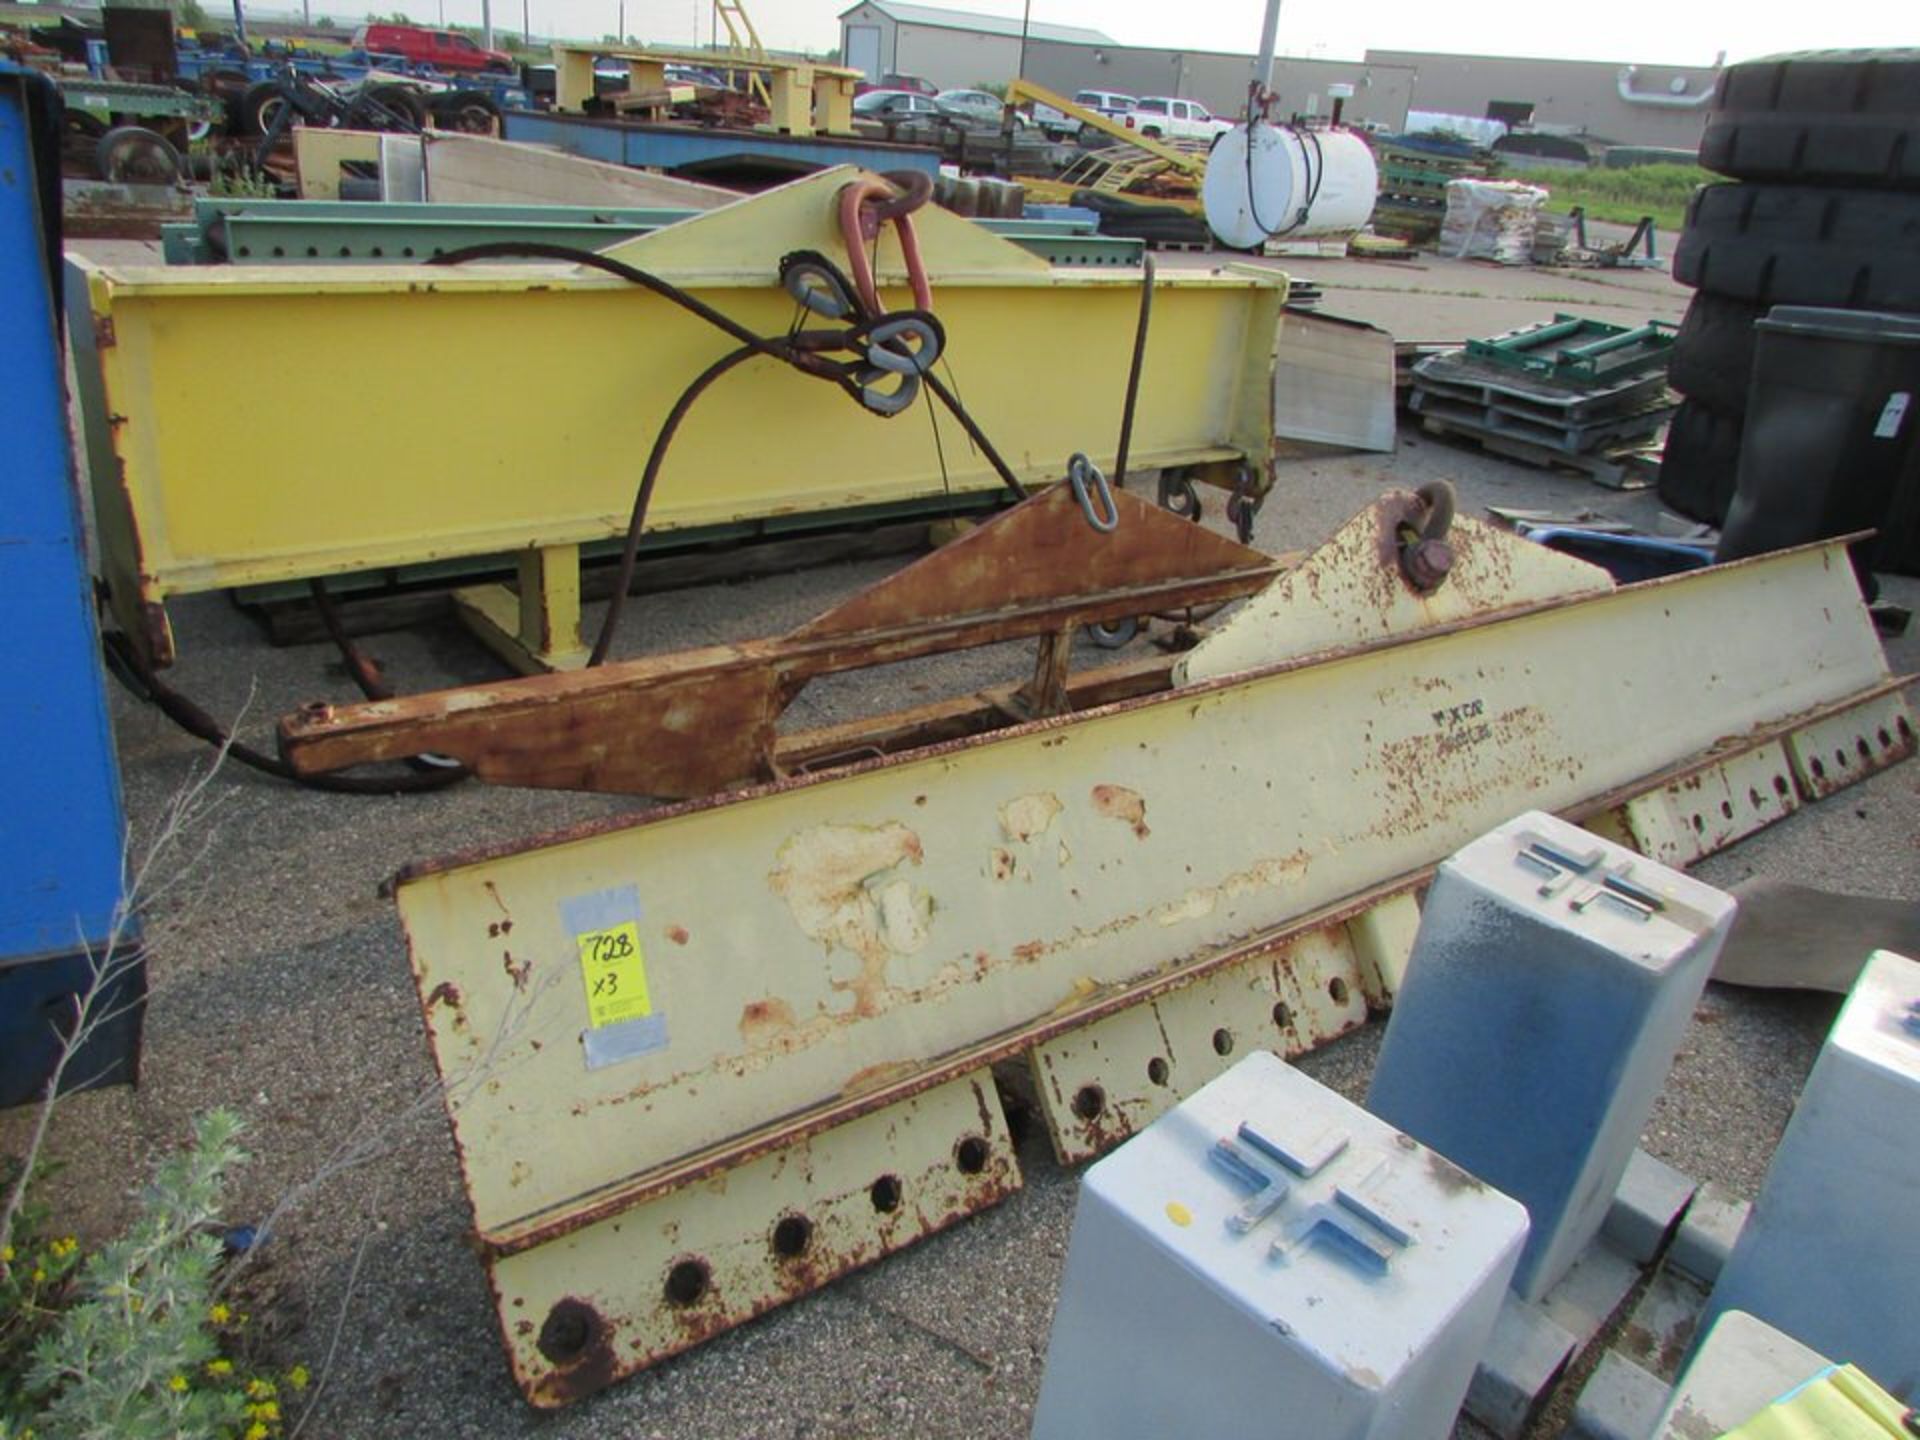 (3) Spreader Bar Lifting Attachments, 14', 11', 134". Loc. 420 Main Ave E, West Fargo, ND 58078